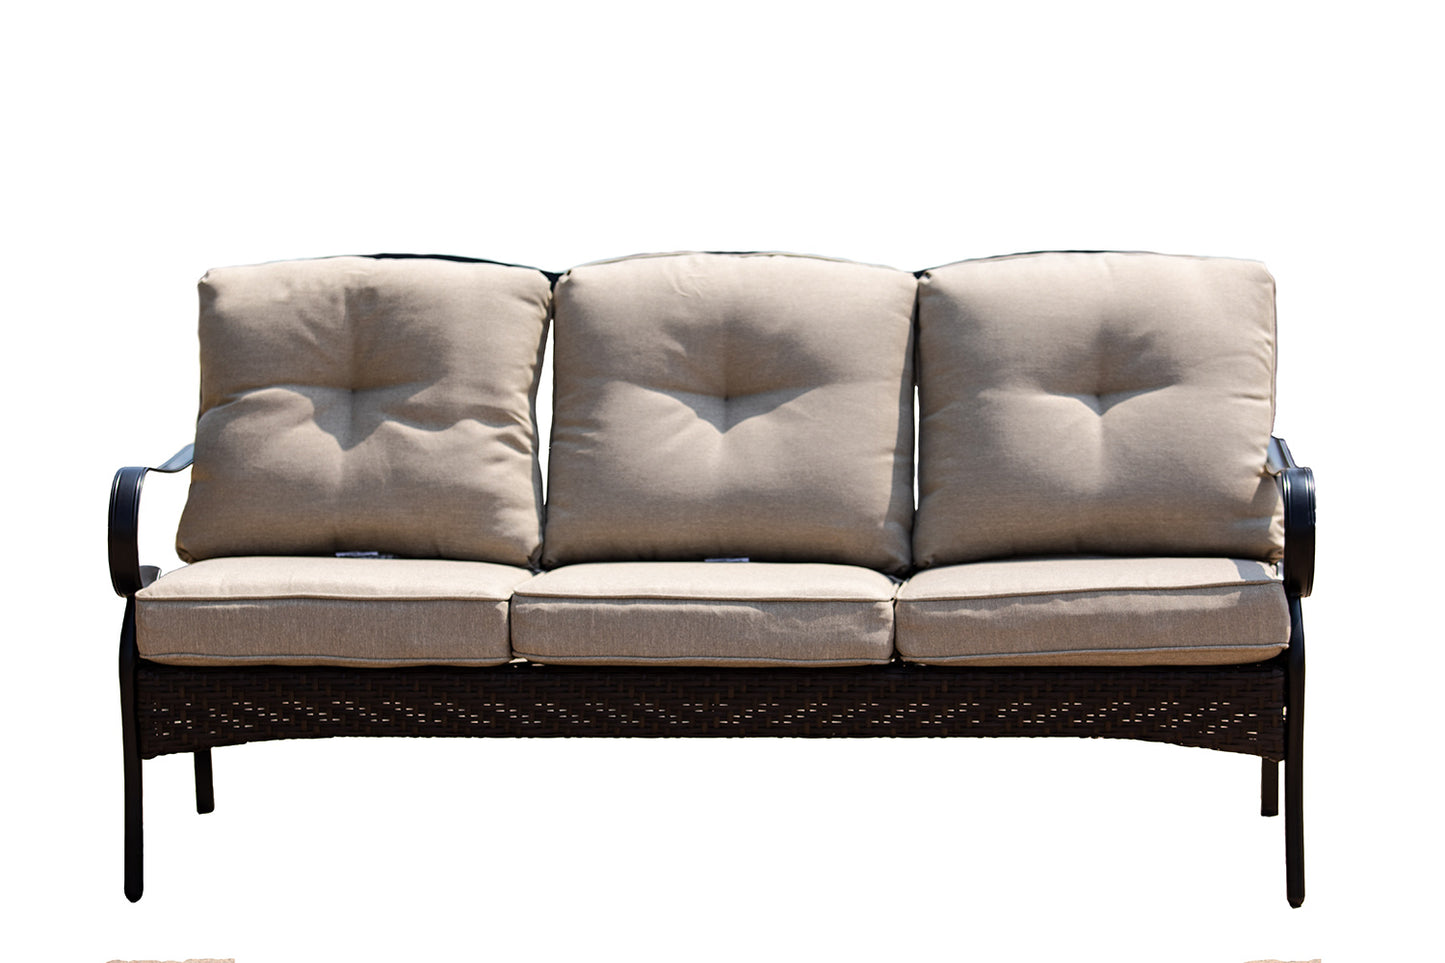 69" Beige Polyester Blend Settee With Black Legs